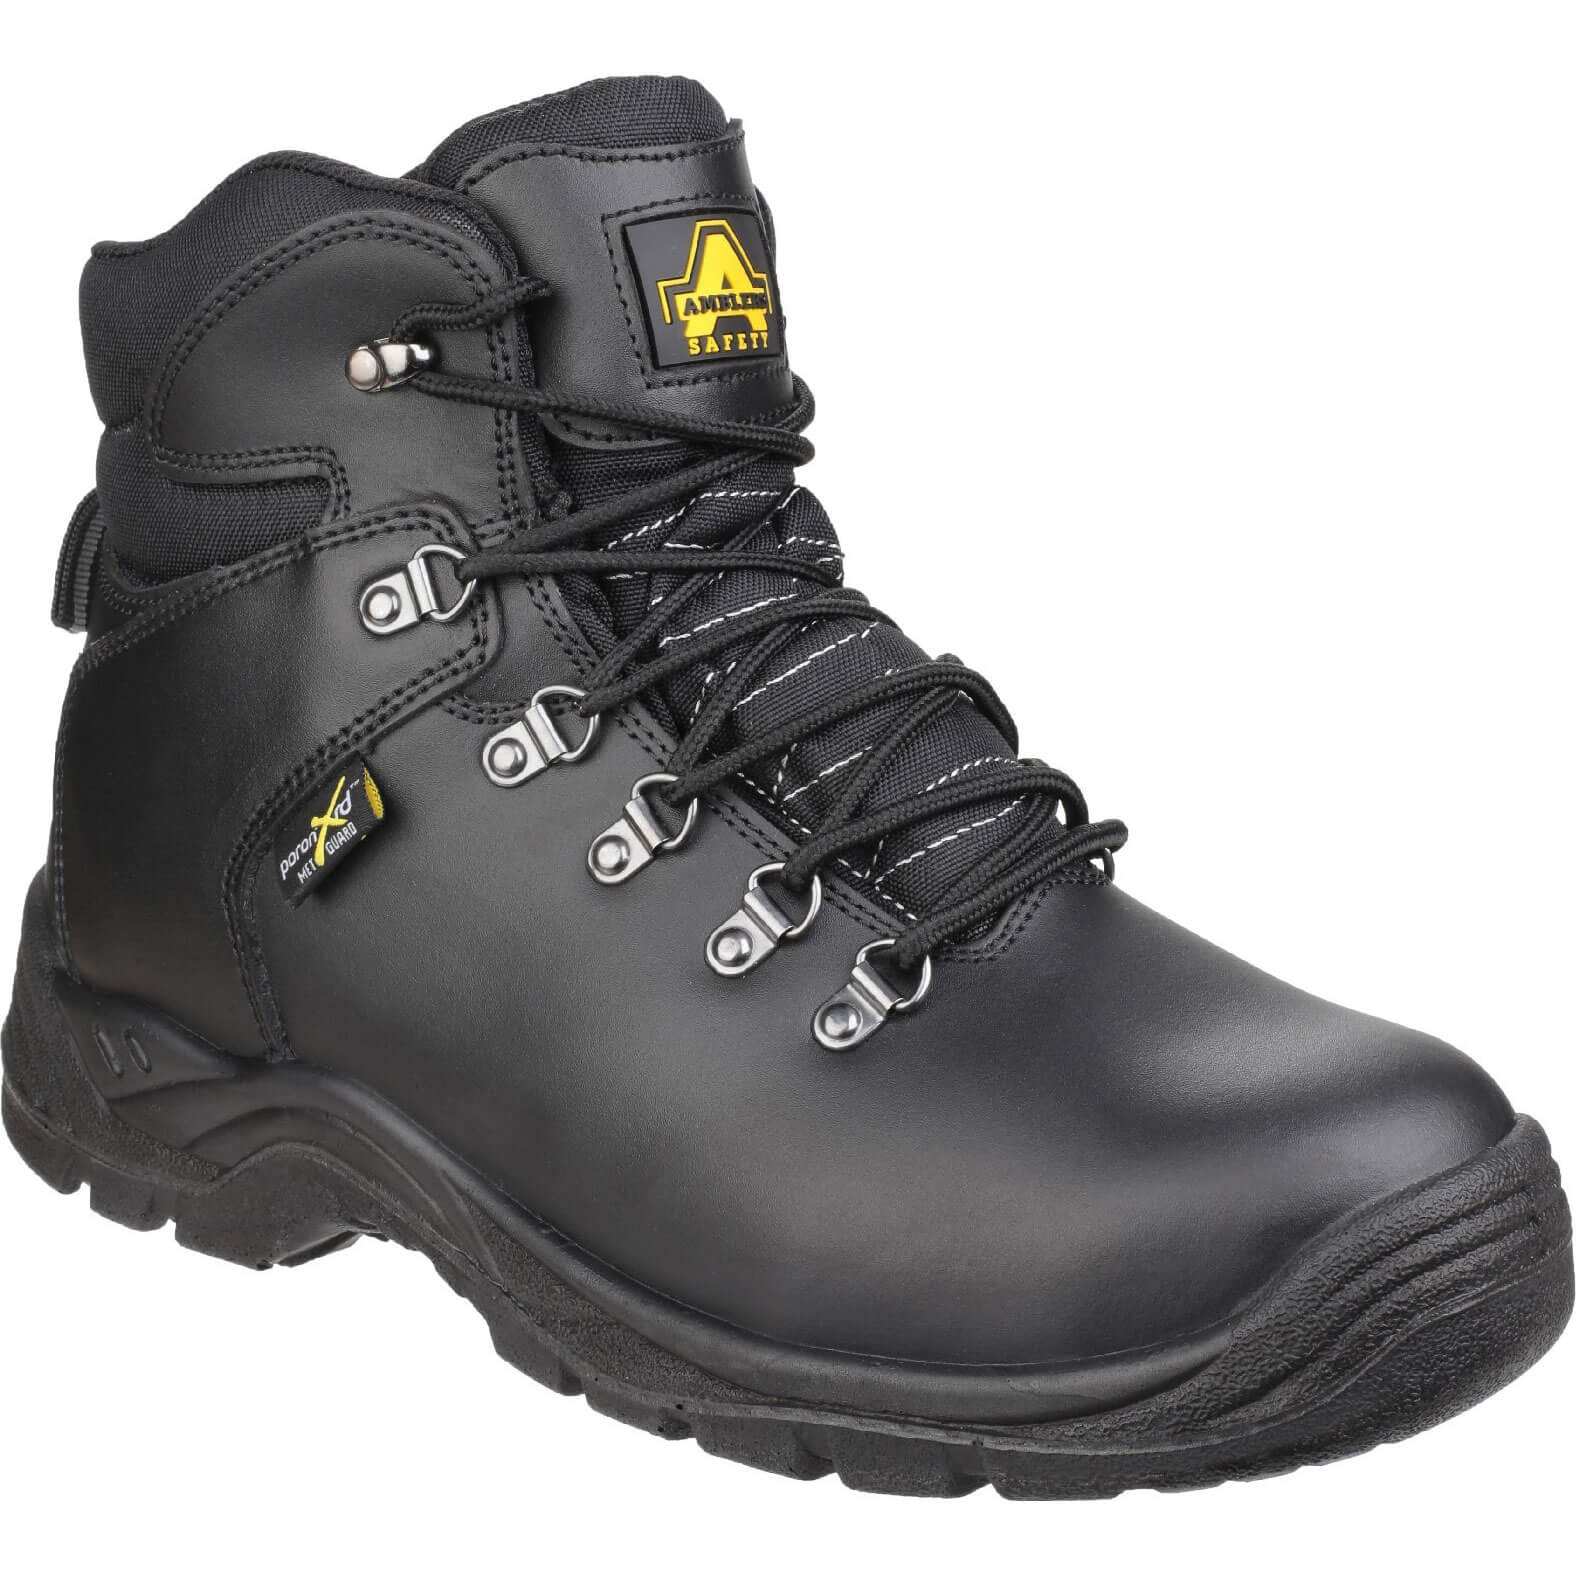 Image of Amblers Mens Safety As335 Poron Xrd Internal Metatarsal Safety Boots Black Size 11